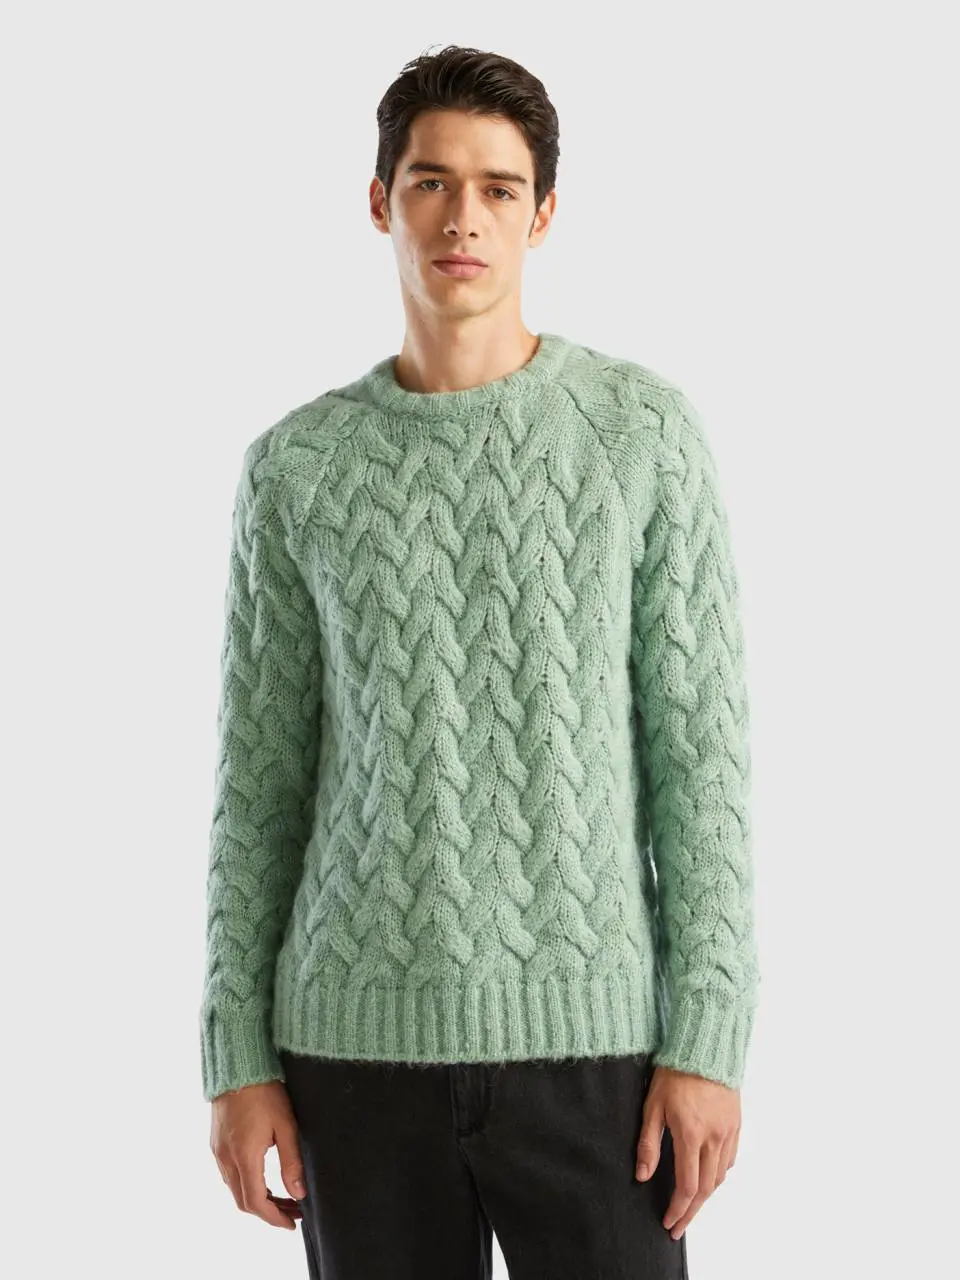 Benetton mohair blend cable knit sweater. 1